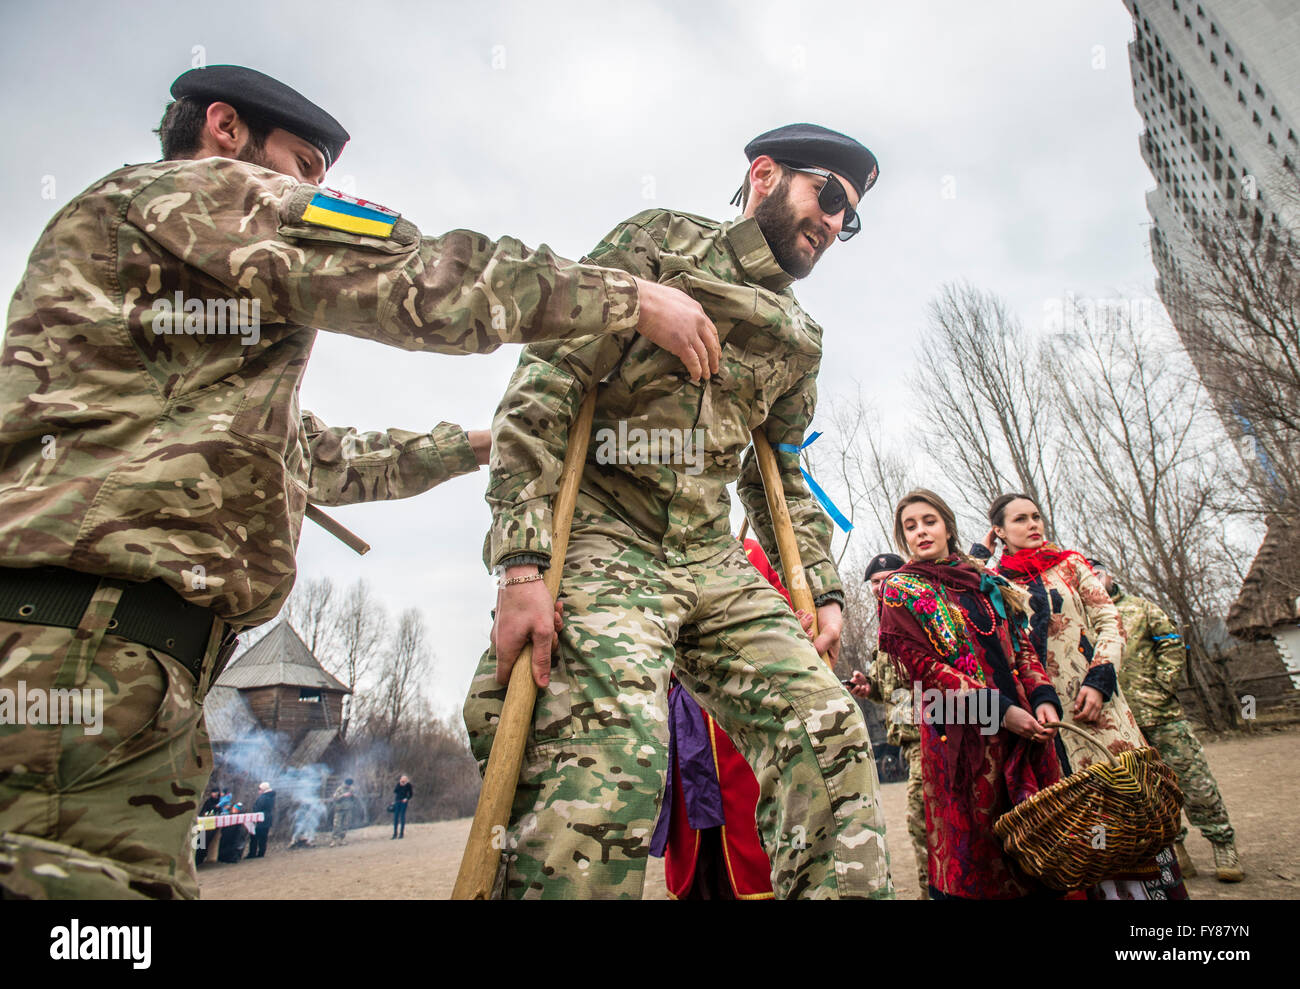 Soldiers of Georgia National Legion (part of Armed Forces of Ukraine) take part in traditional games during Maslenitsa festivities in Mamayeva Sloboda, Kyiv, Ukraine (Photo by Oleksandr Rupeta) Stock Photo